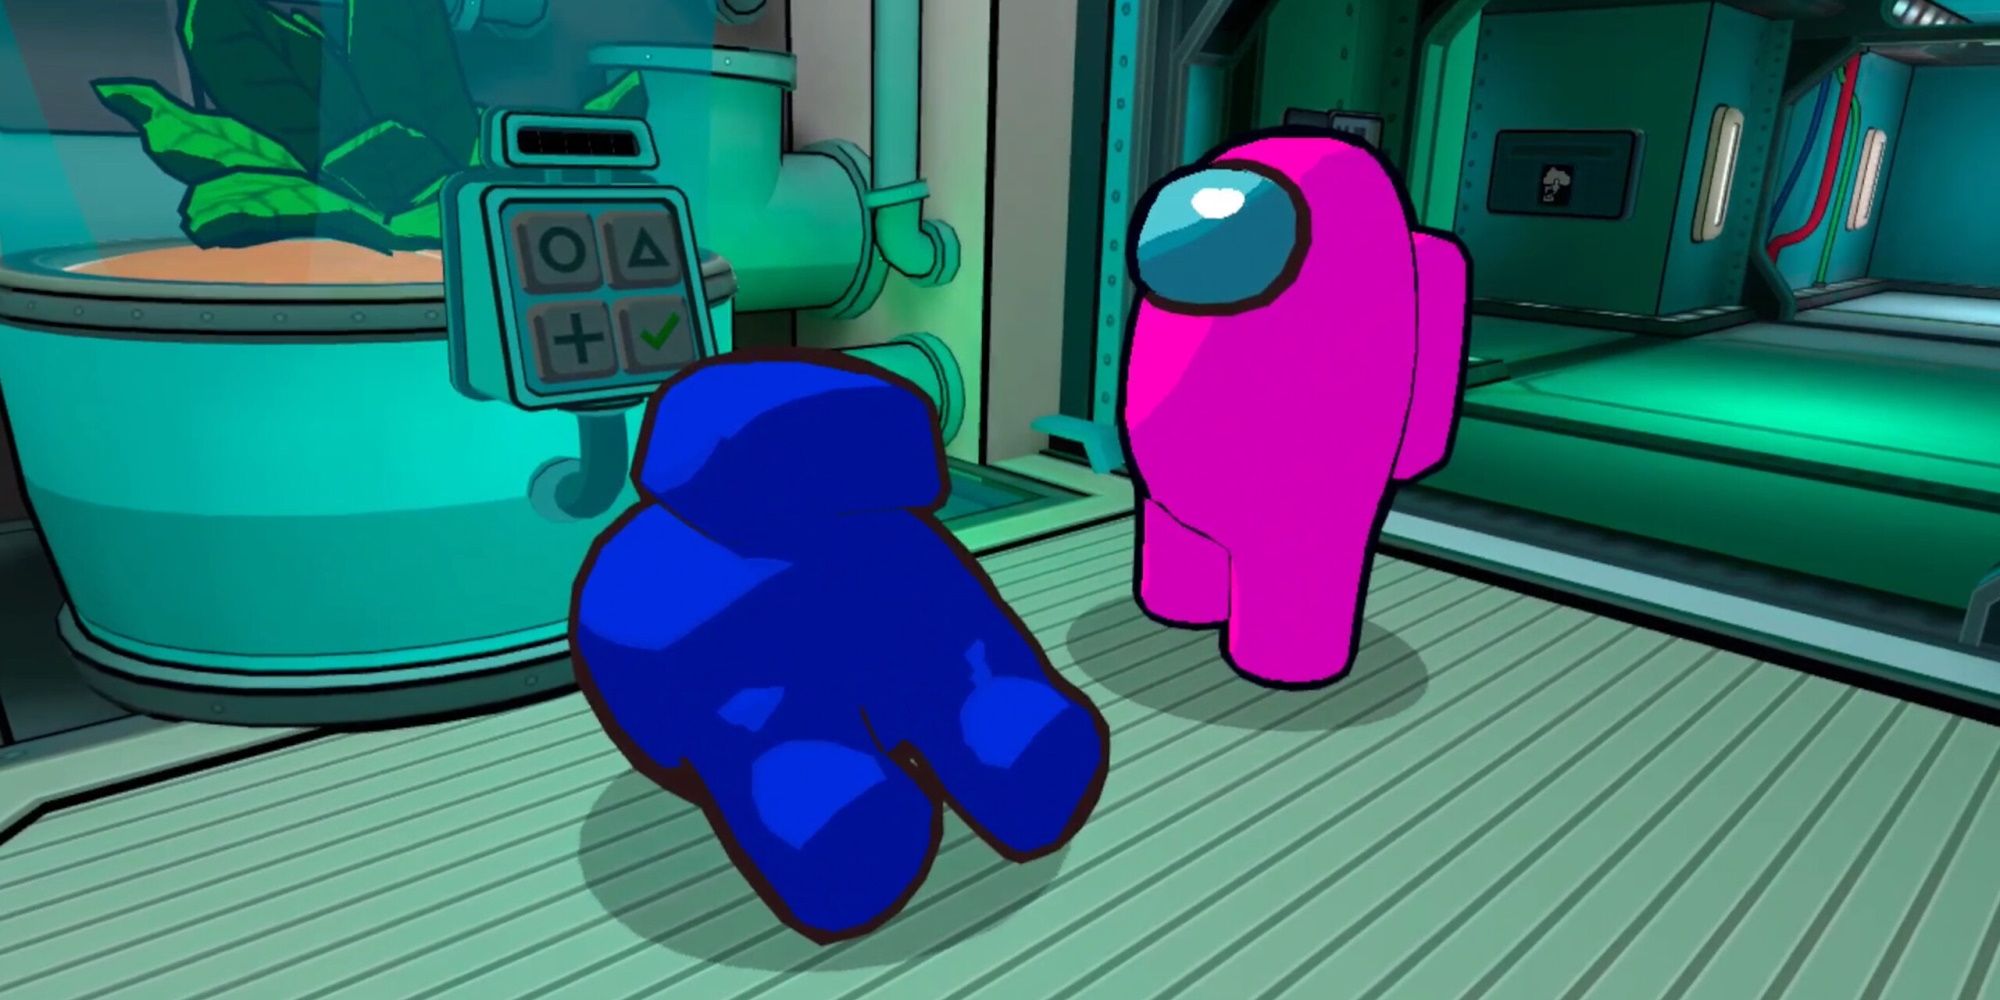 A dead crewmate in front of the plant task while another bean looks at them.